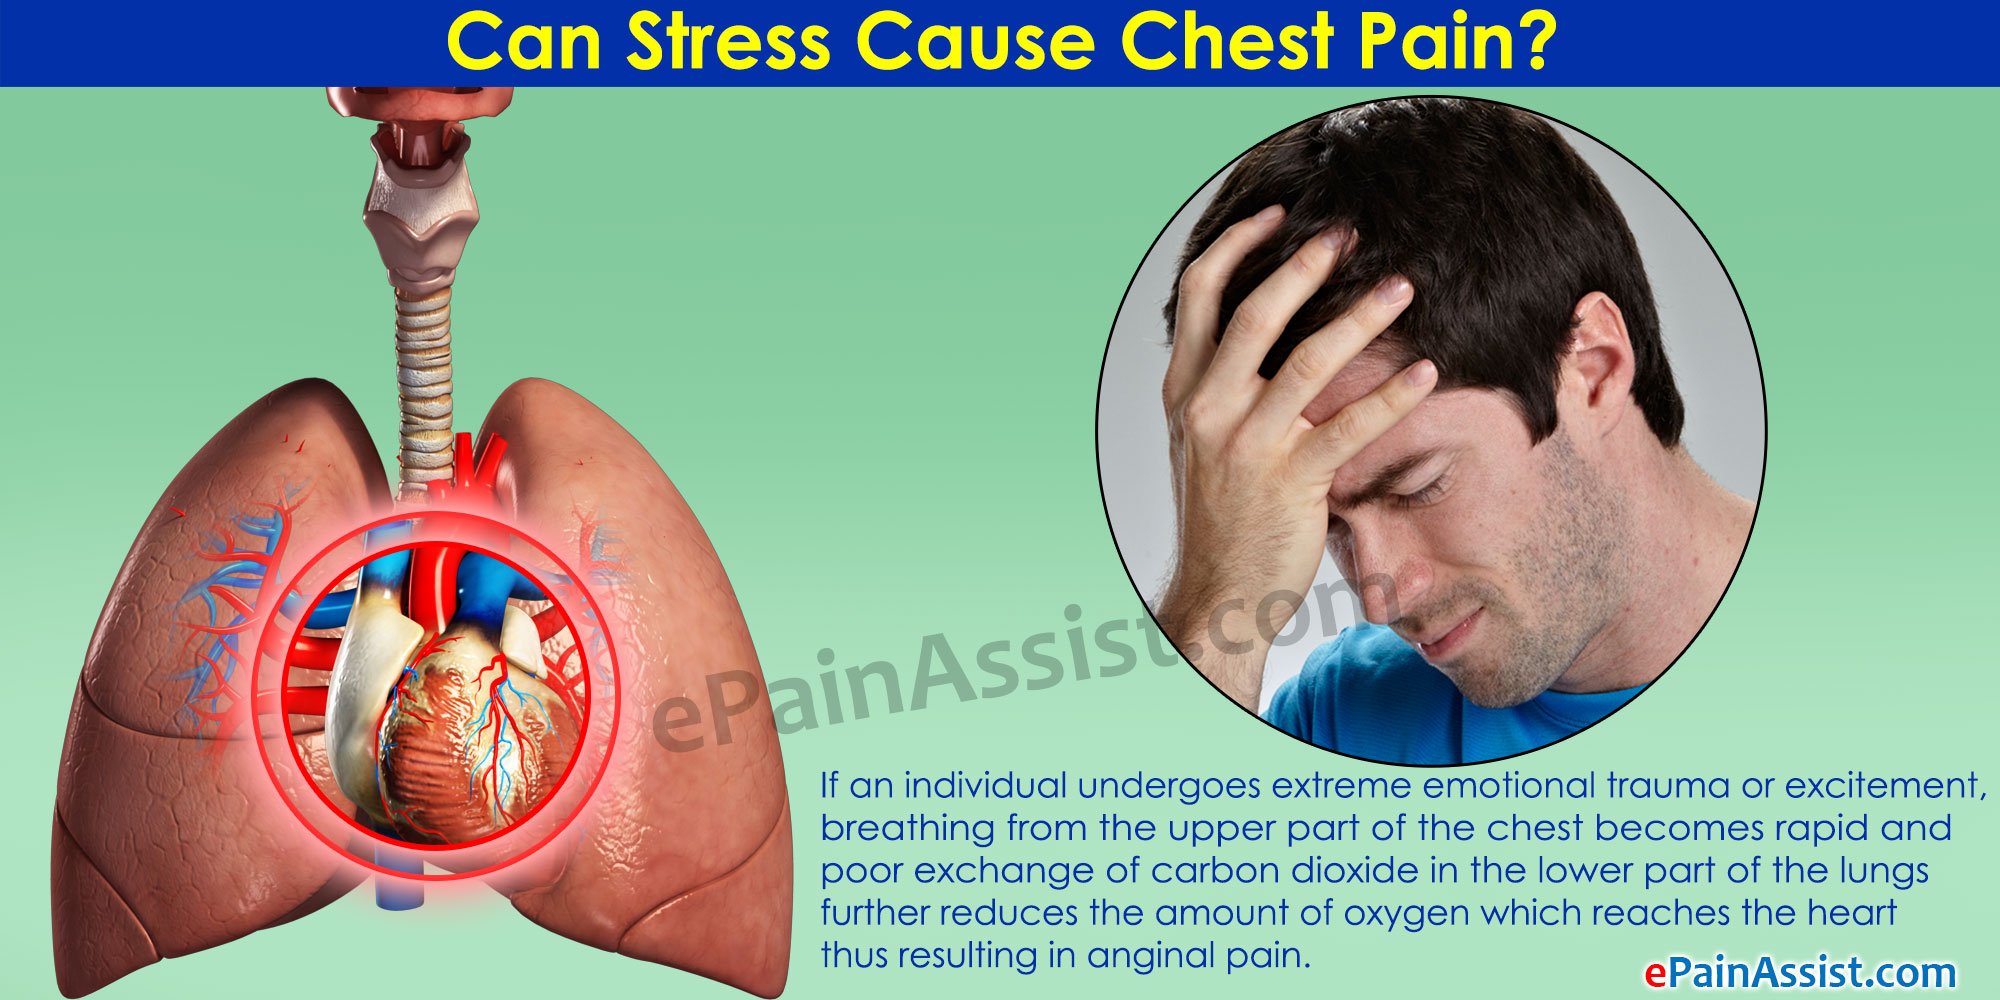 Can Stress Cause Chest Pain?